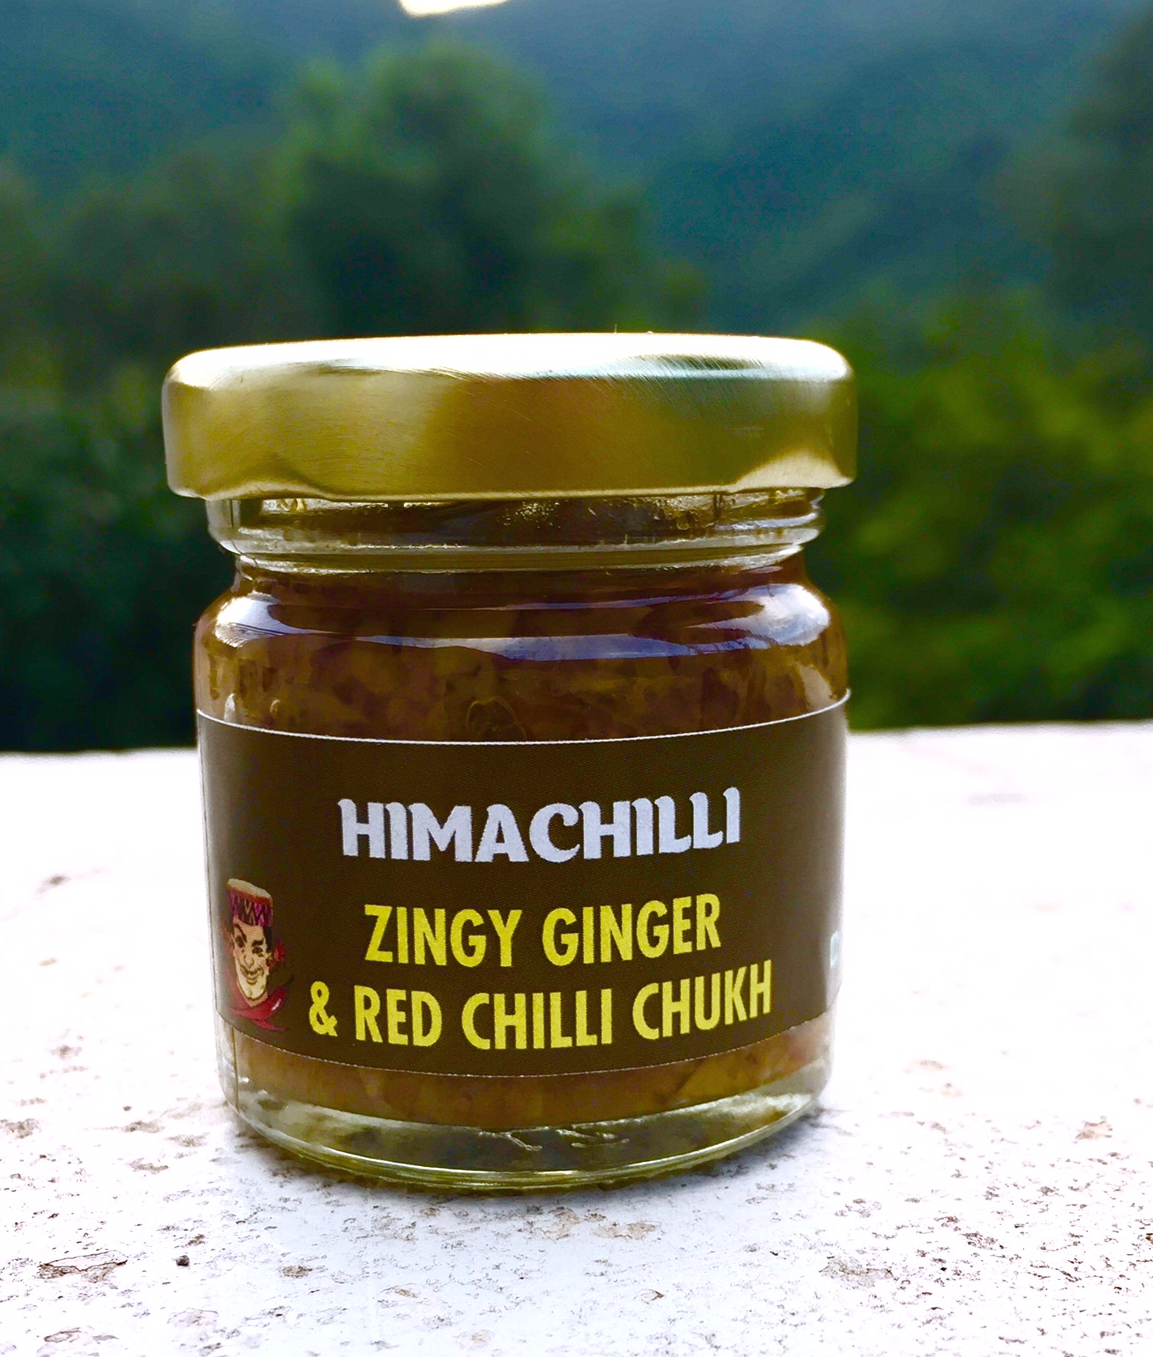 Small- Himachilli Chukh Ginger & Sundried Red Chilli Flavour (coming soon)